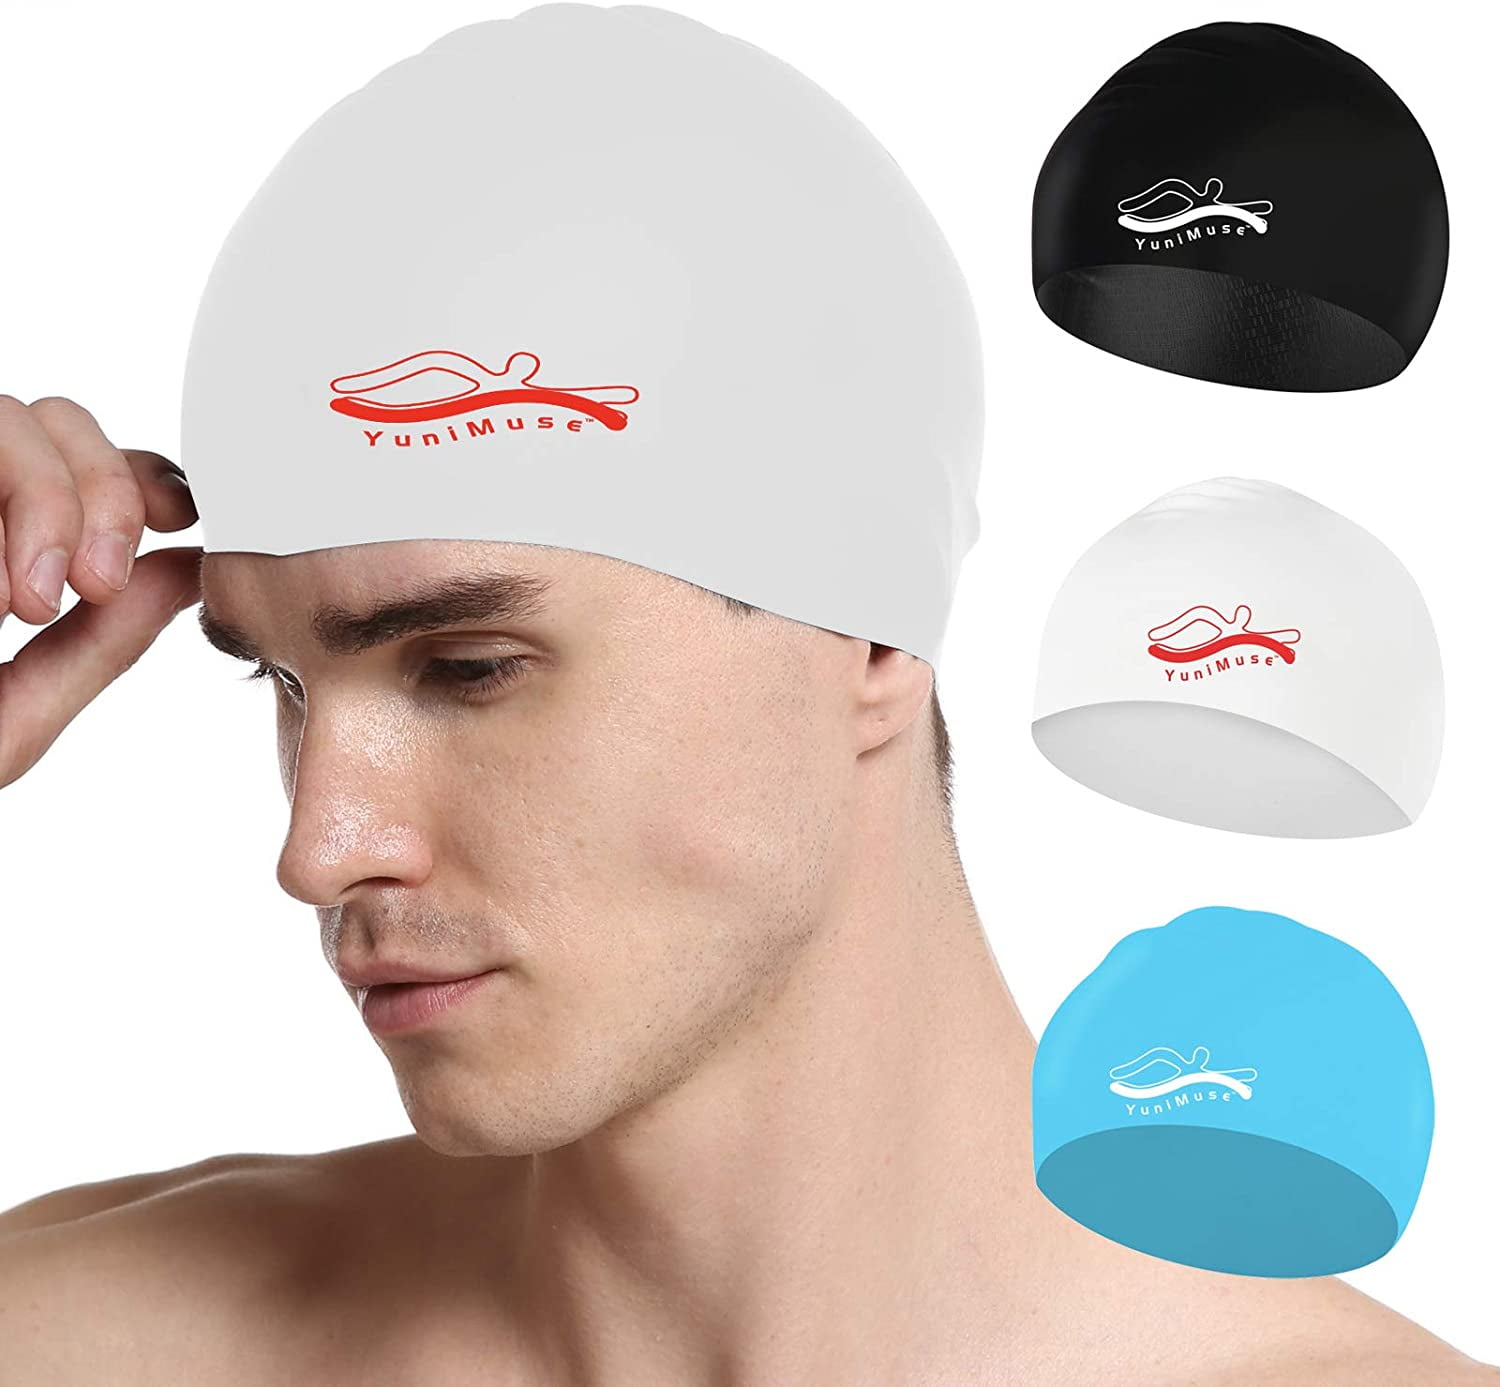 Smooth Surface and Non-Slip Inside Upgrade 1mm Thickness YuniMuse Silicone Swim Cap 3 Pack for Women Men Adults Boys Girls 